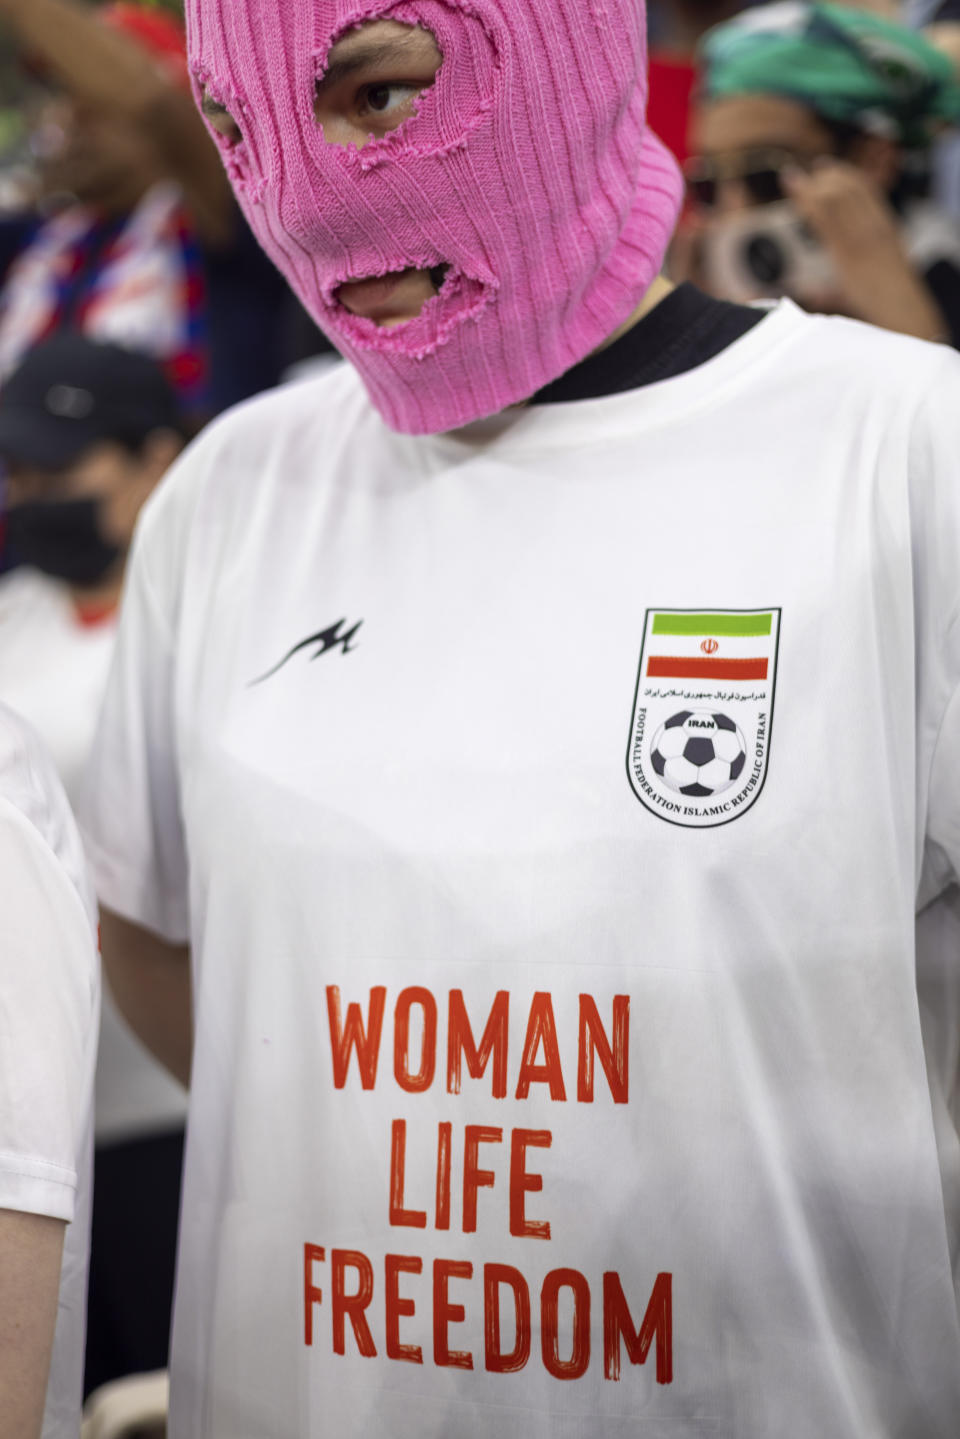 One of group of young women wearing colorful balaclavas who identified themselves as members of the Pussy Riot collective in the stands during the World Cup group B soccer match between Iran and the United States at the Al Thumama Stadium in Doha, Qatar, Tuesday, Nov. 29, 2022. (AP Photo/Ciaran Fahey)